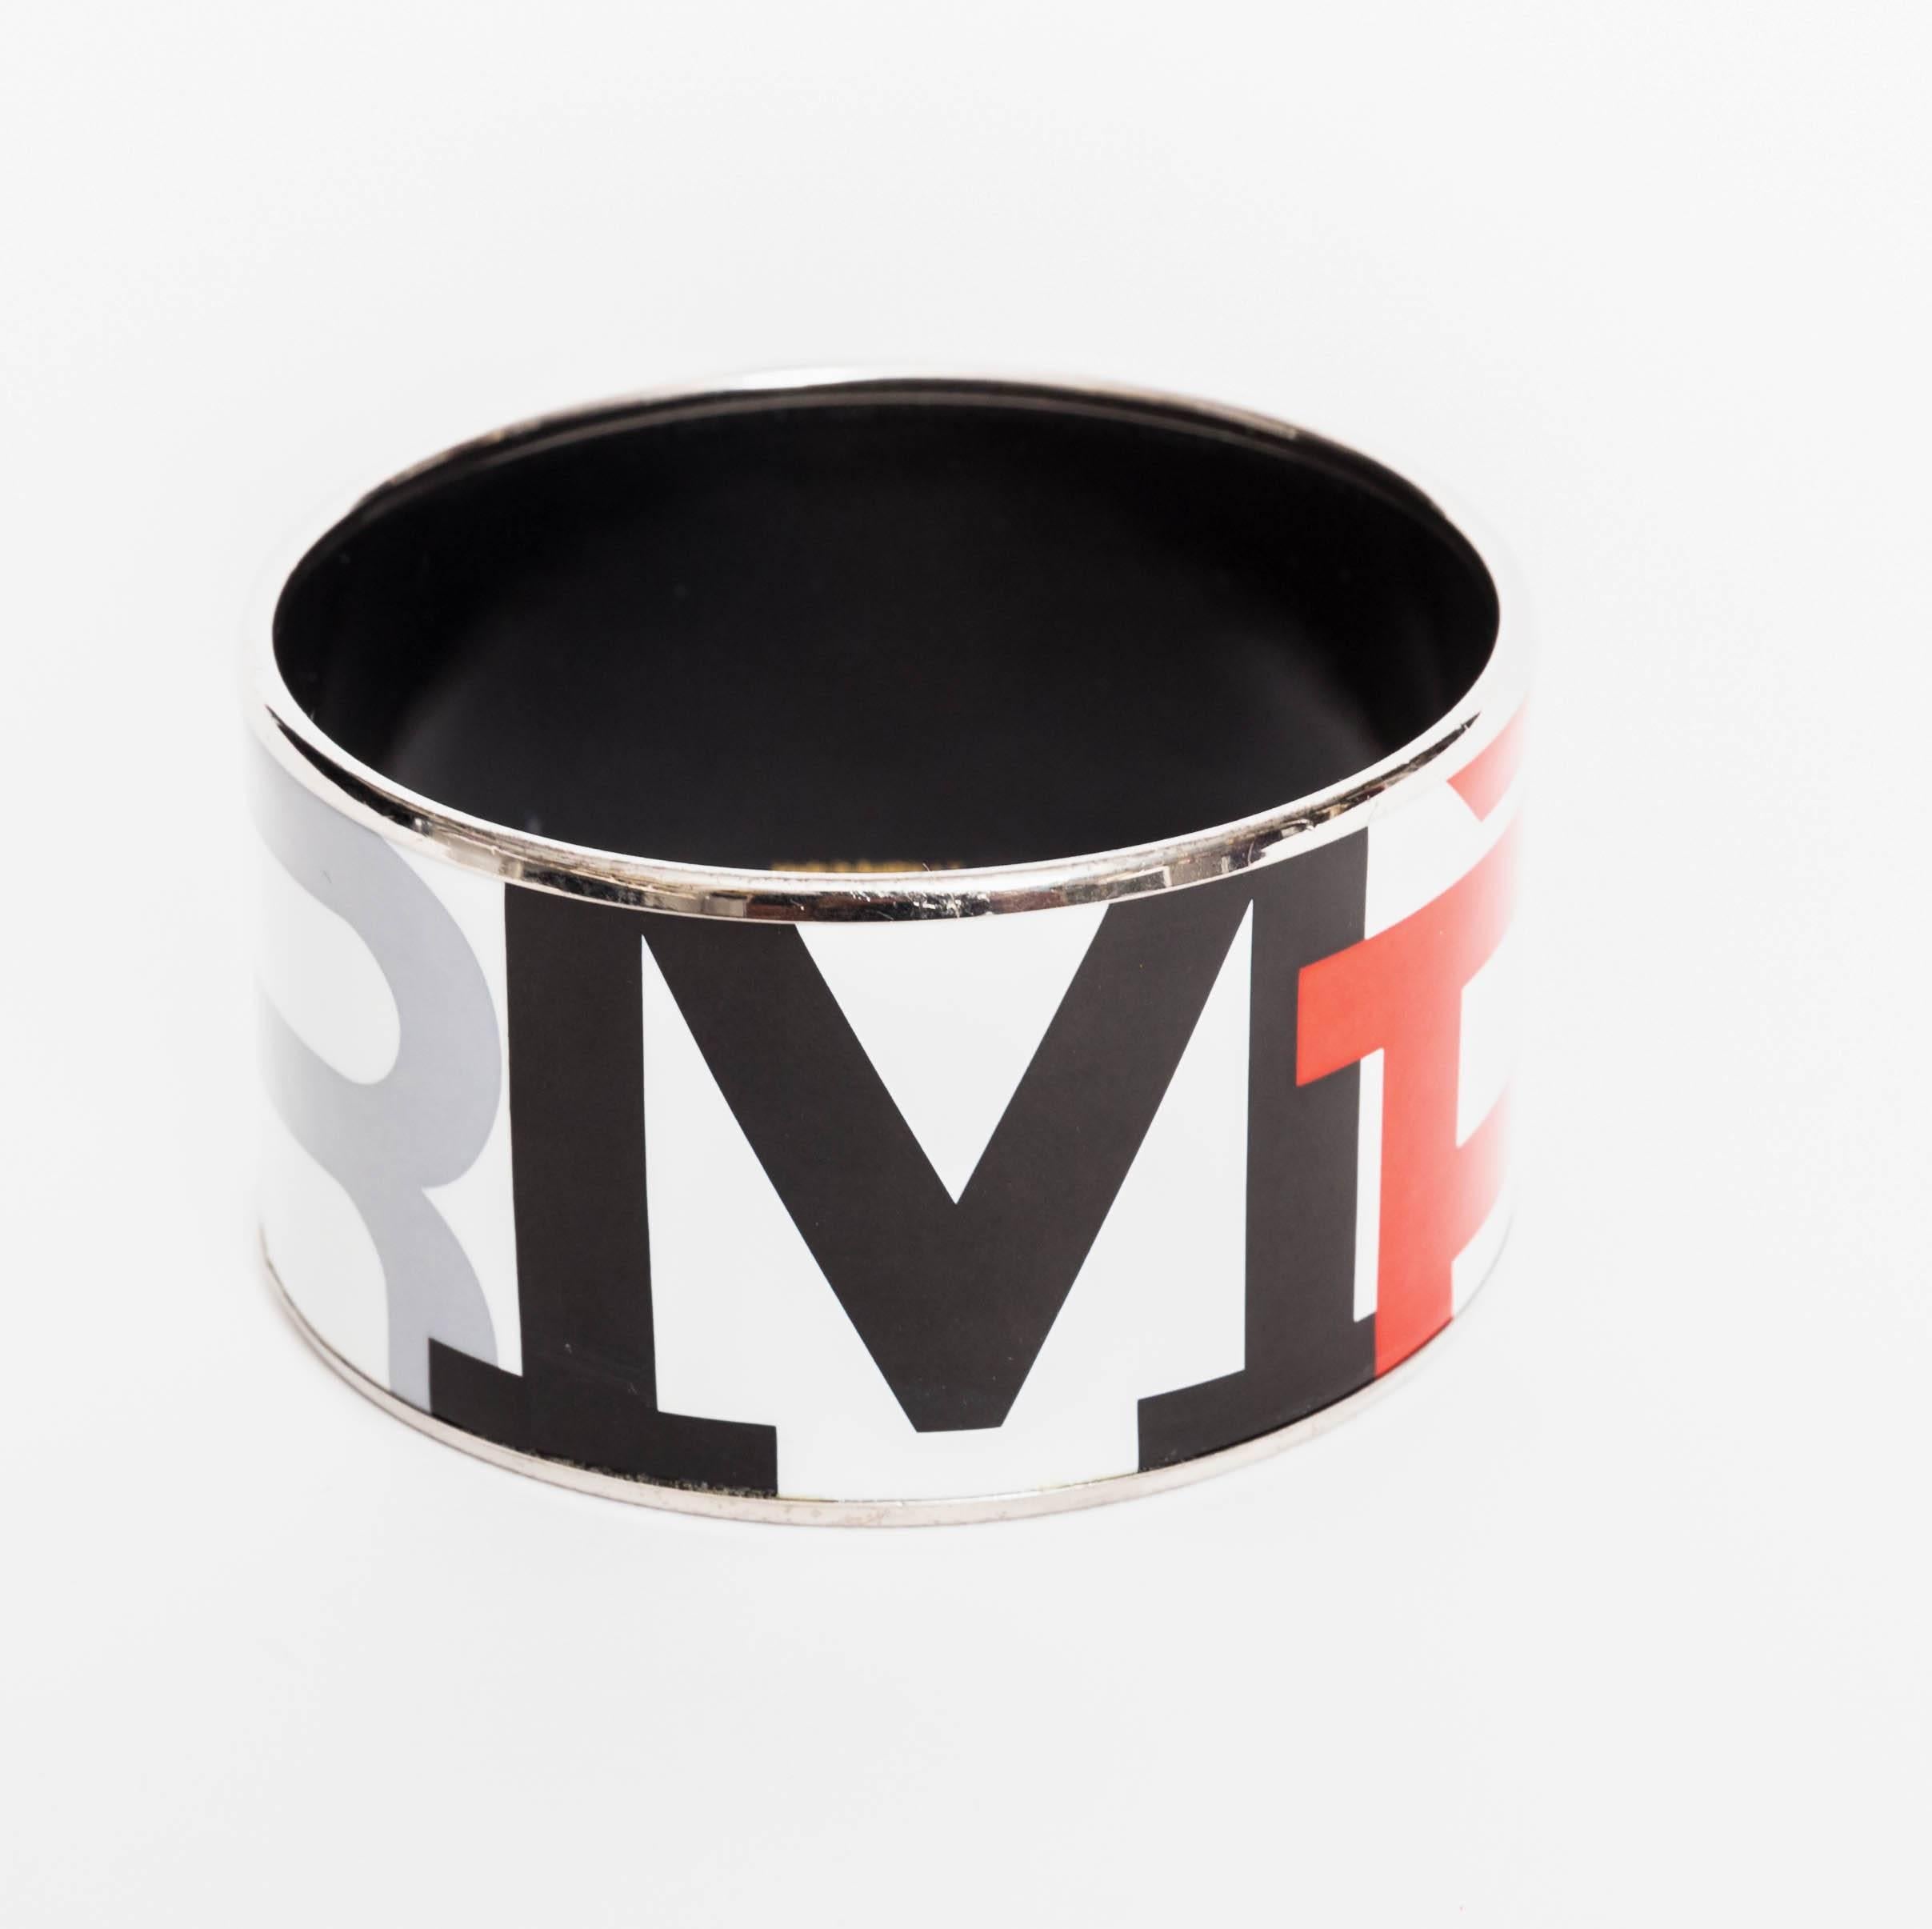 Fabulous Hermes enamel print bracelet - 1.5 inches wide / 2.5 inches in diameter
Hermes is spelled out in red, black, grey and brown.
Exterior Condition is excellent. Enamel shows wear where it meets the silver band on a small portion of the inside